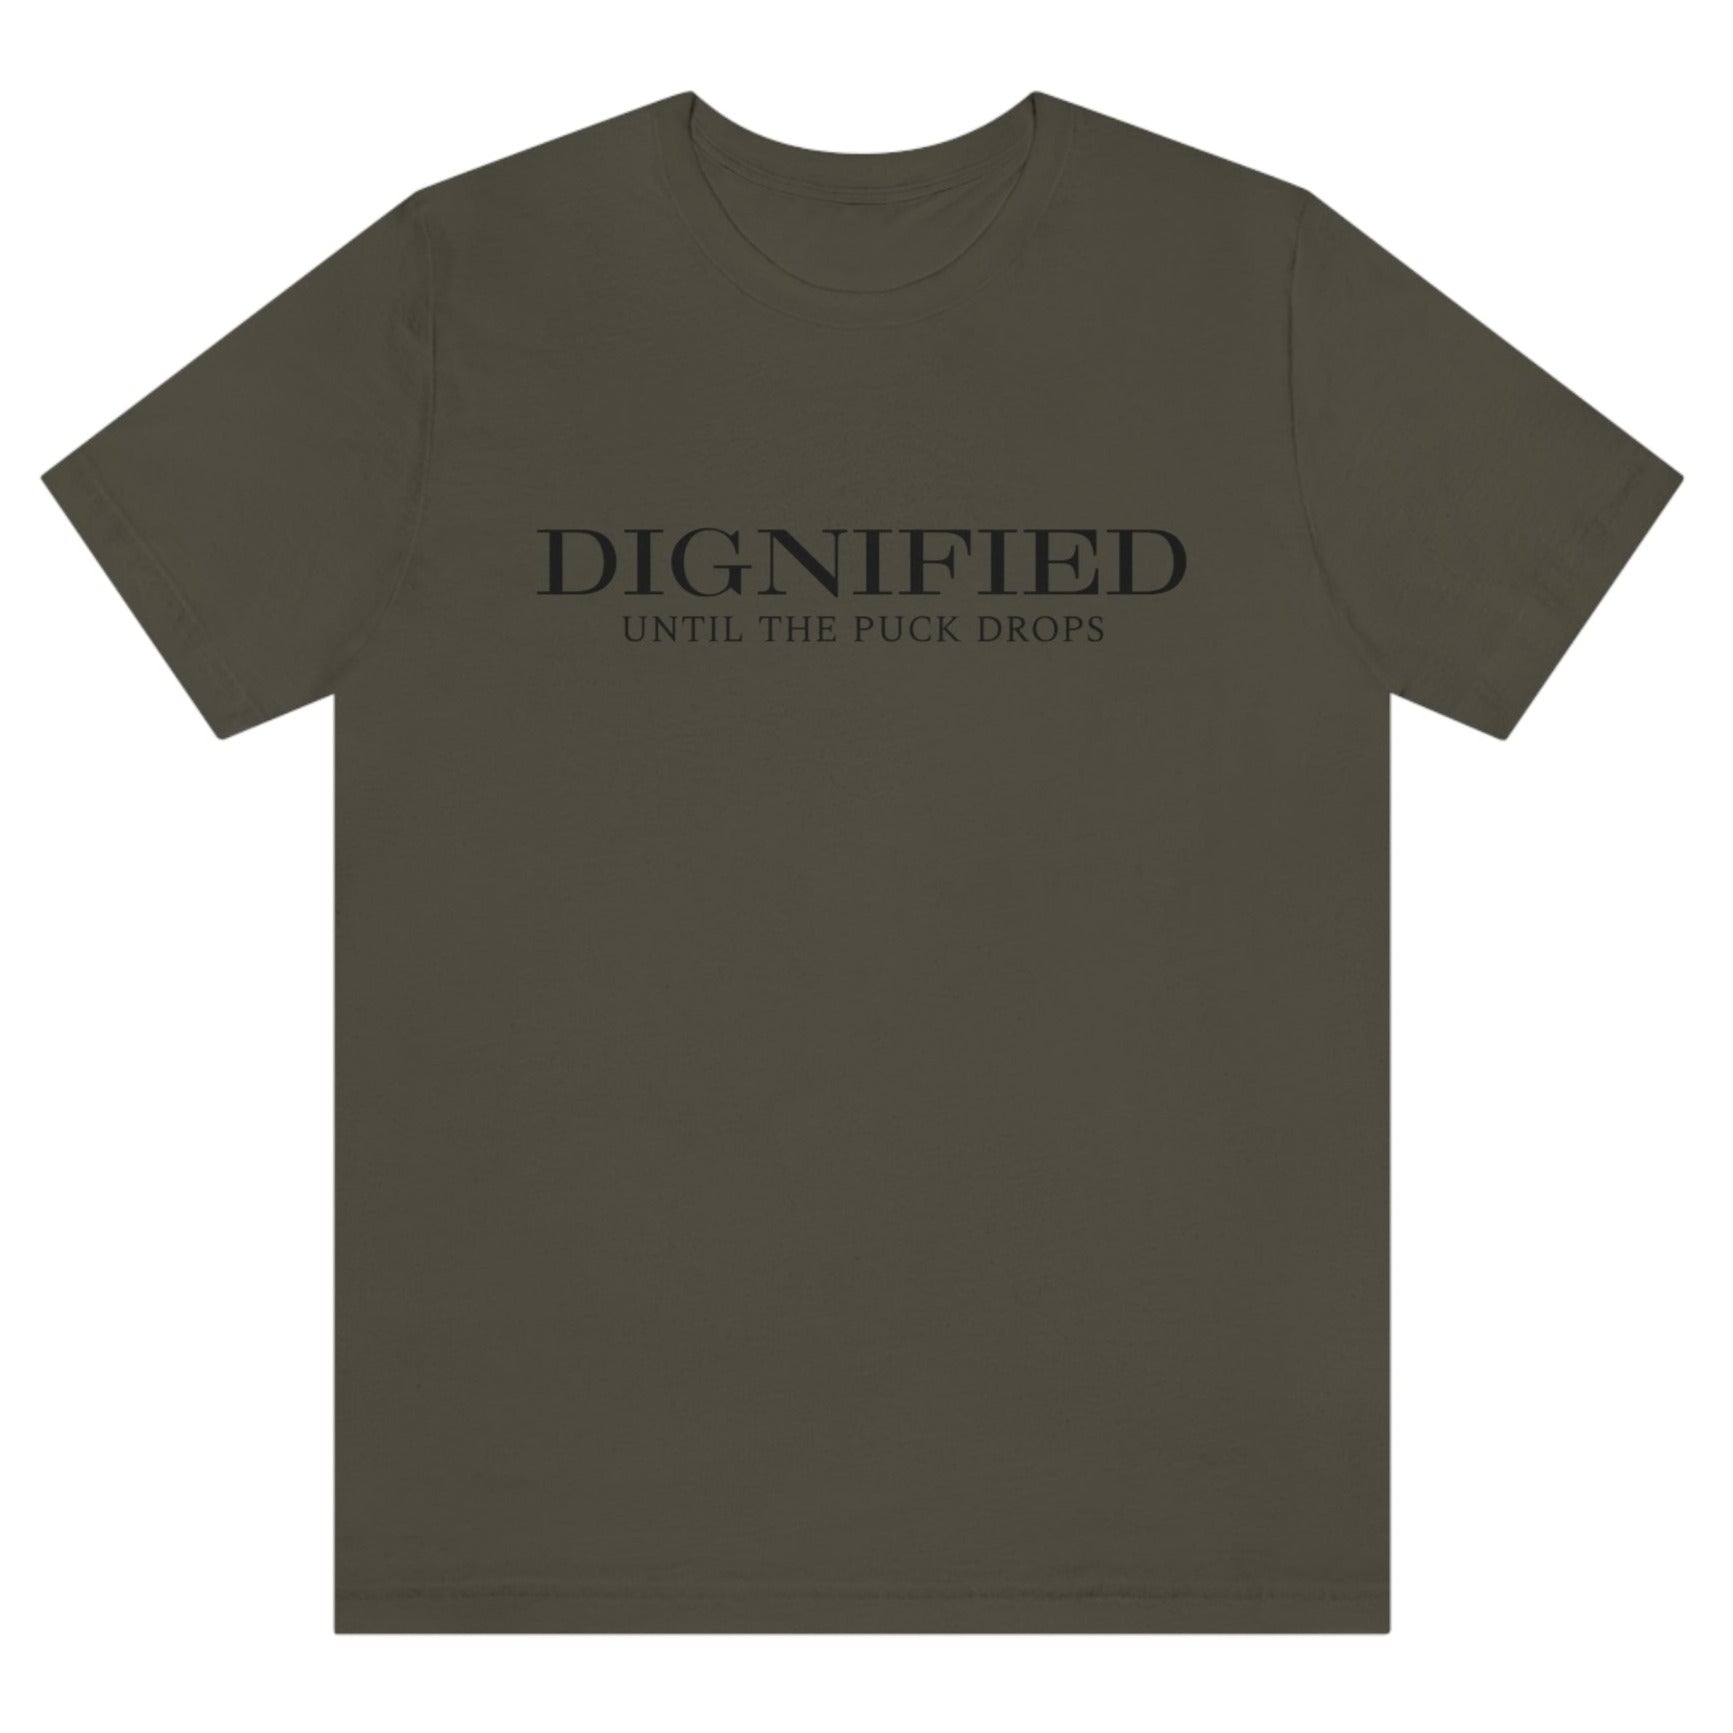     dignified-until-the-puck-drops-army-green-t-shirt-mens-sports-hockey